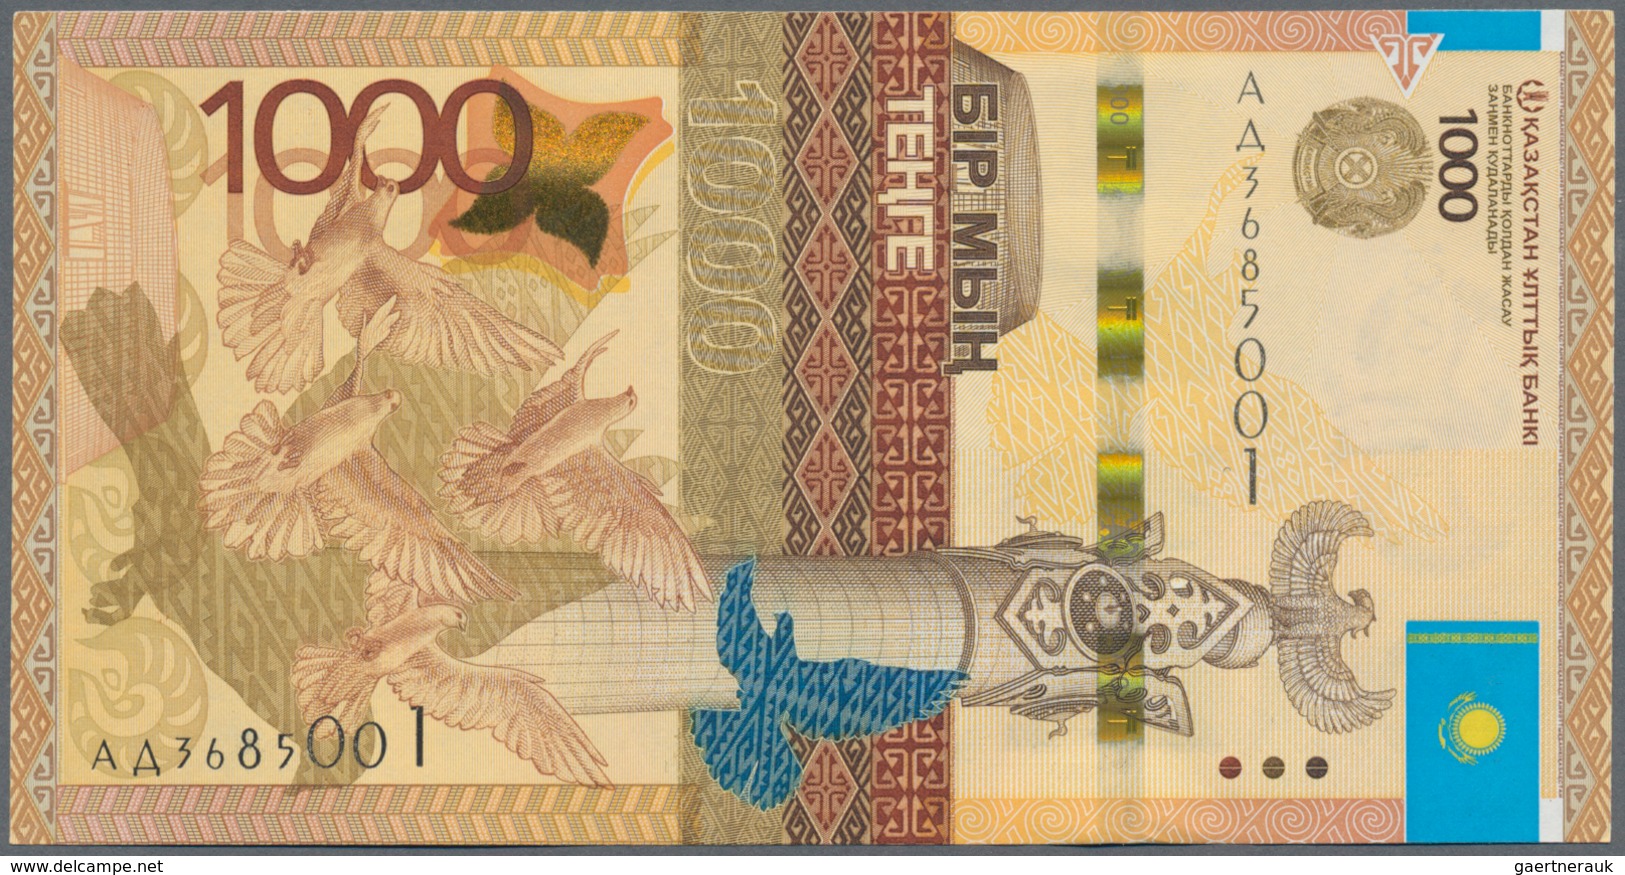 Kazakhstan / Kasachstan: Very nice set with 9 banknotes of the 2012 – 2017 issue with 2000 Tenge 201